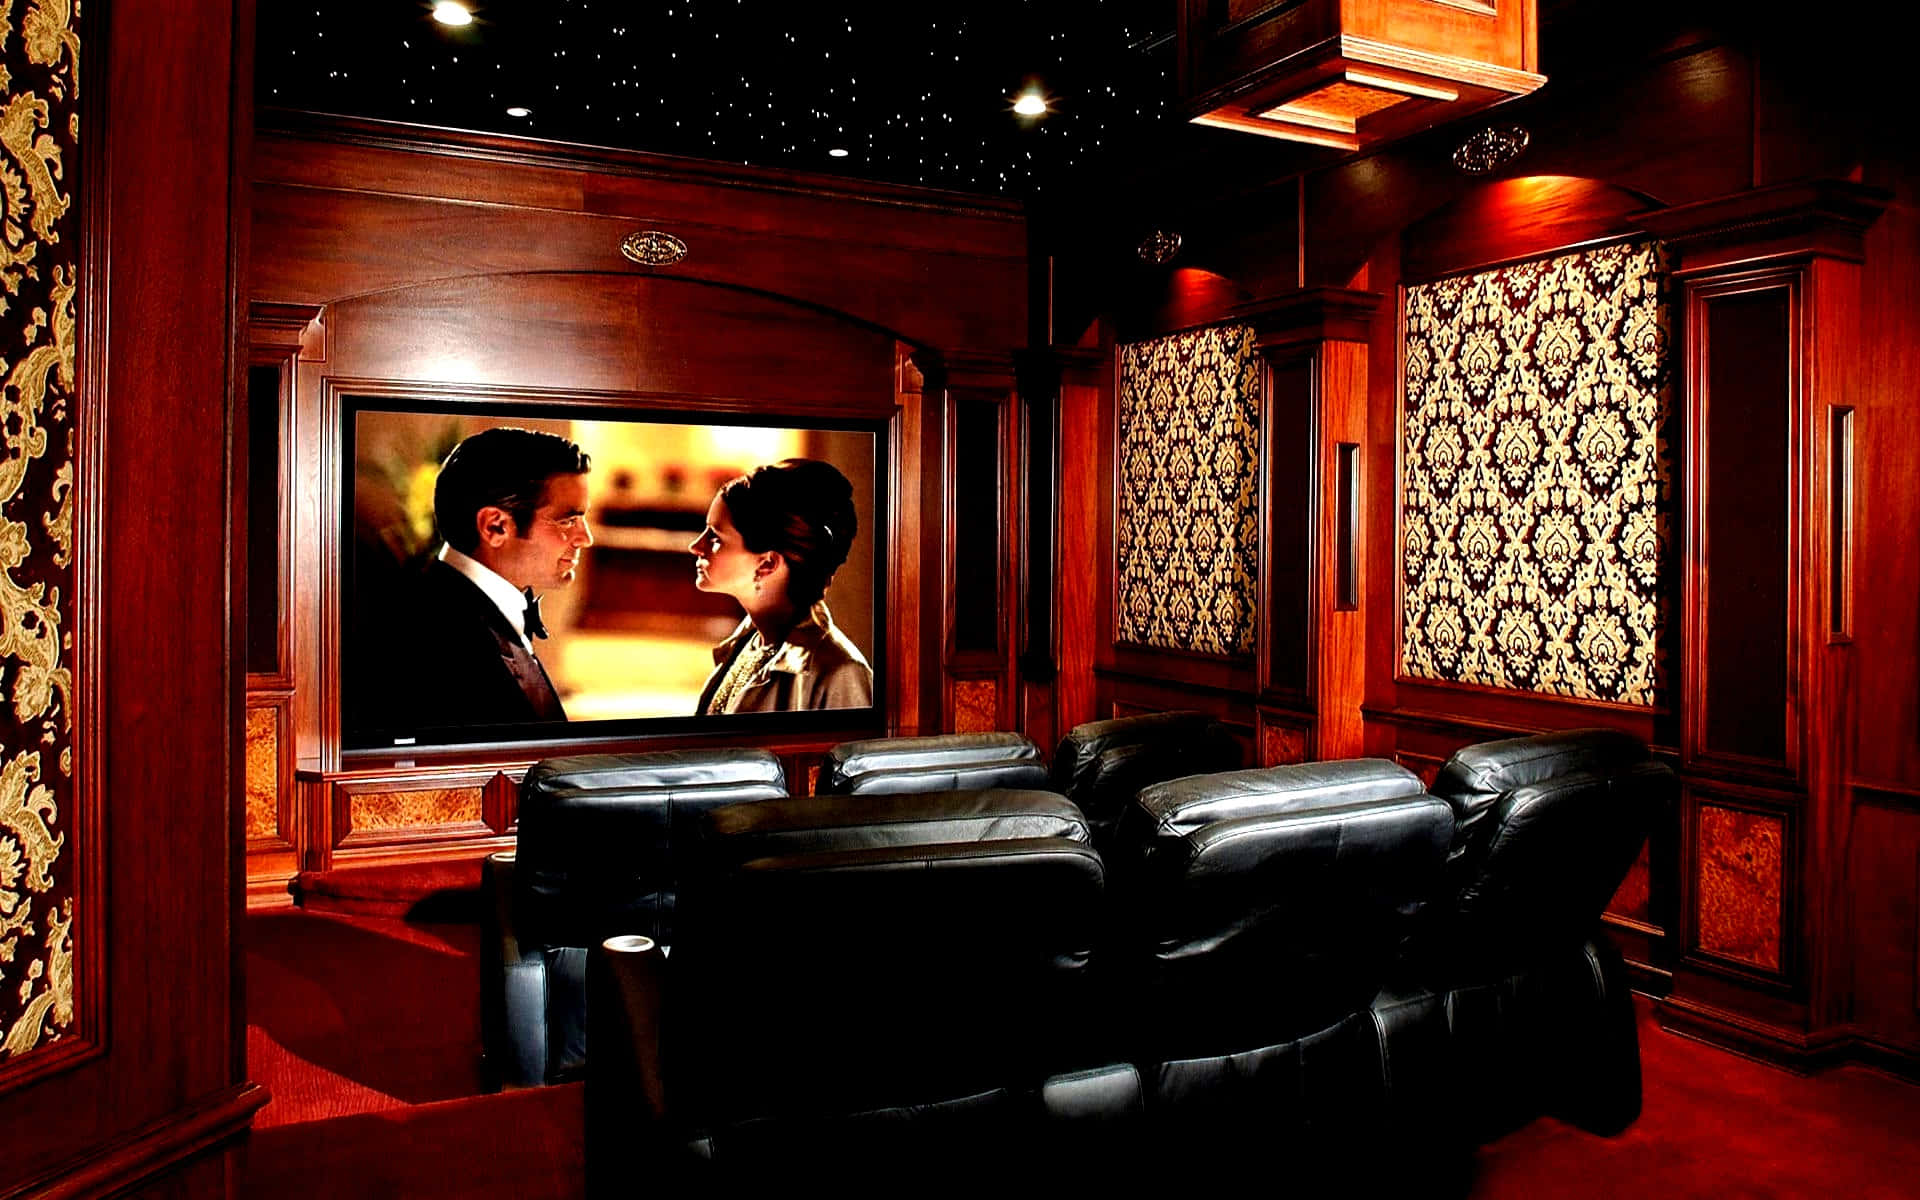 Enjoy your favorite movies and sports in your own home theater as you sit on a plush couch. Wallpaper